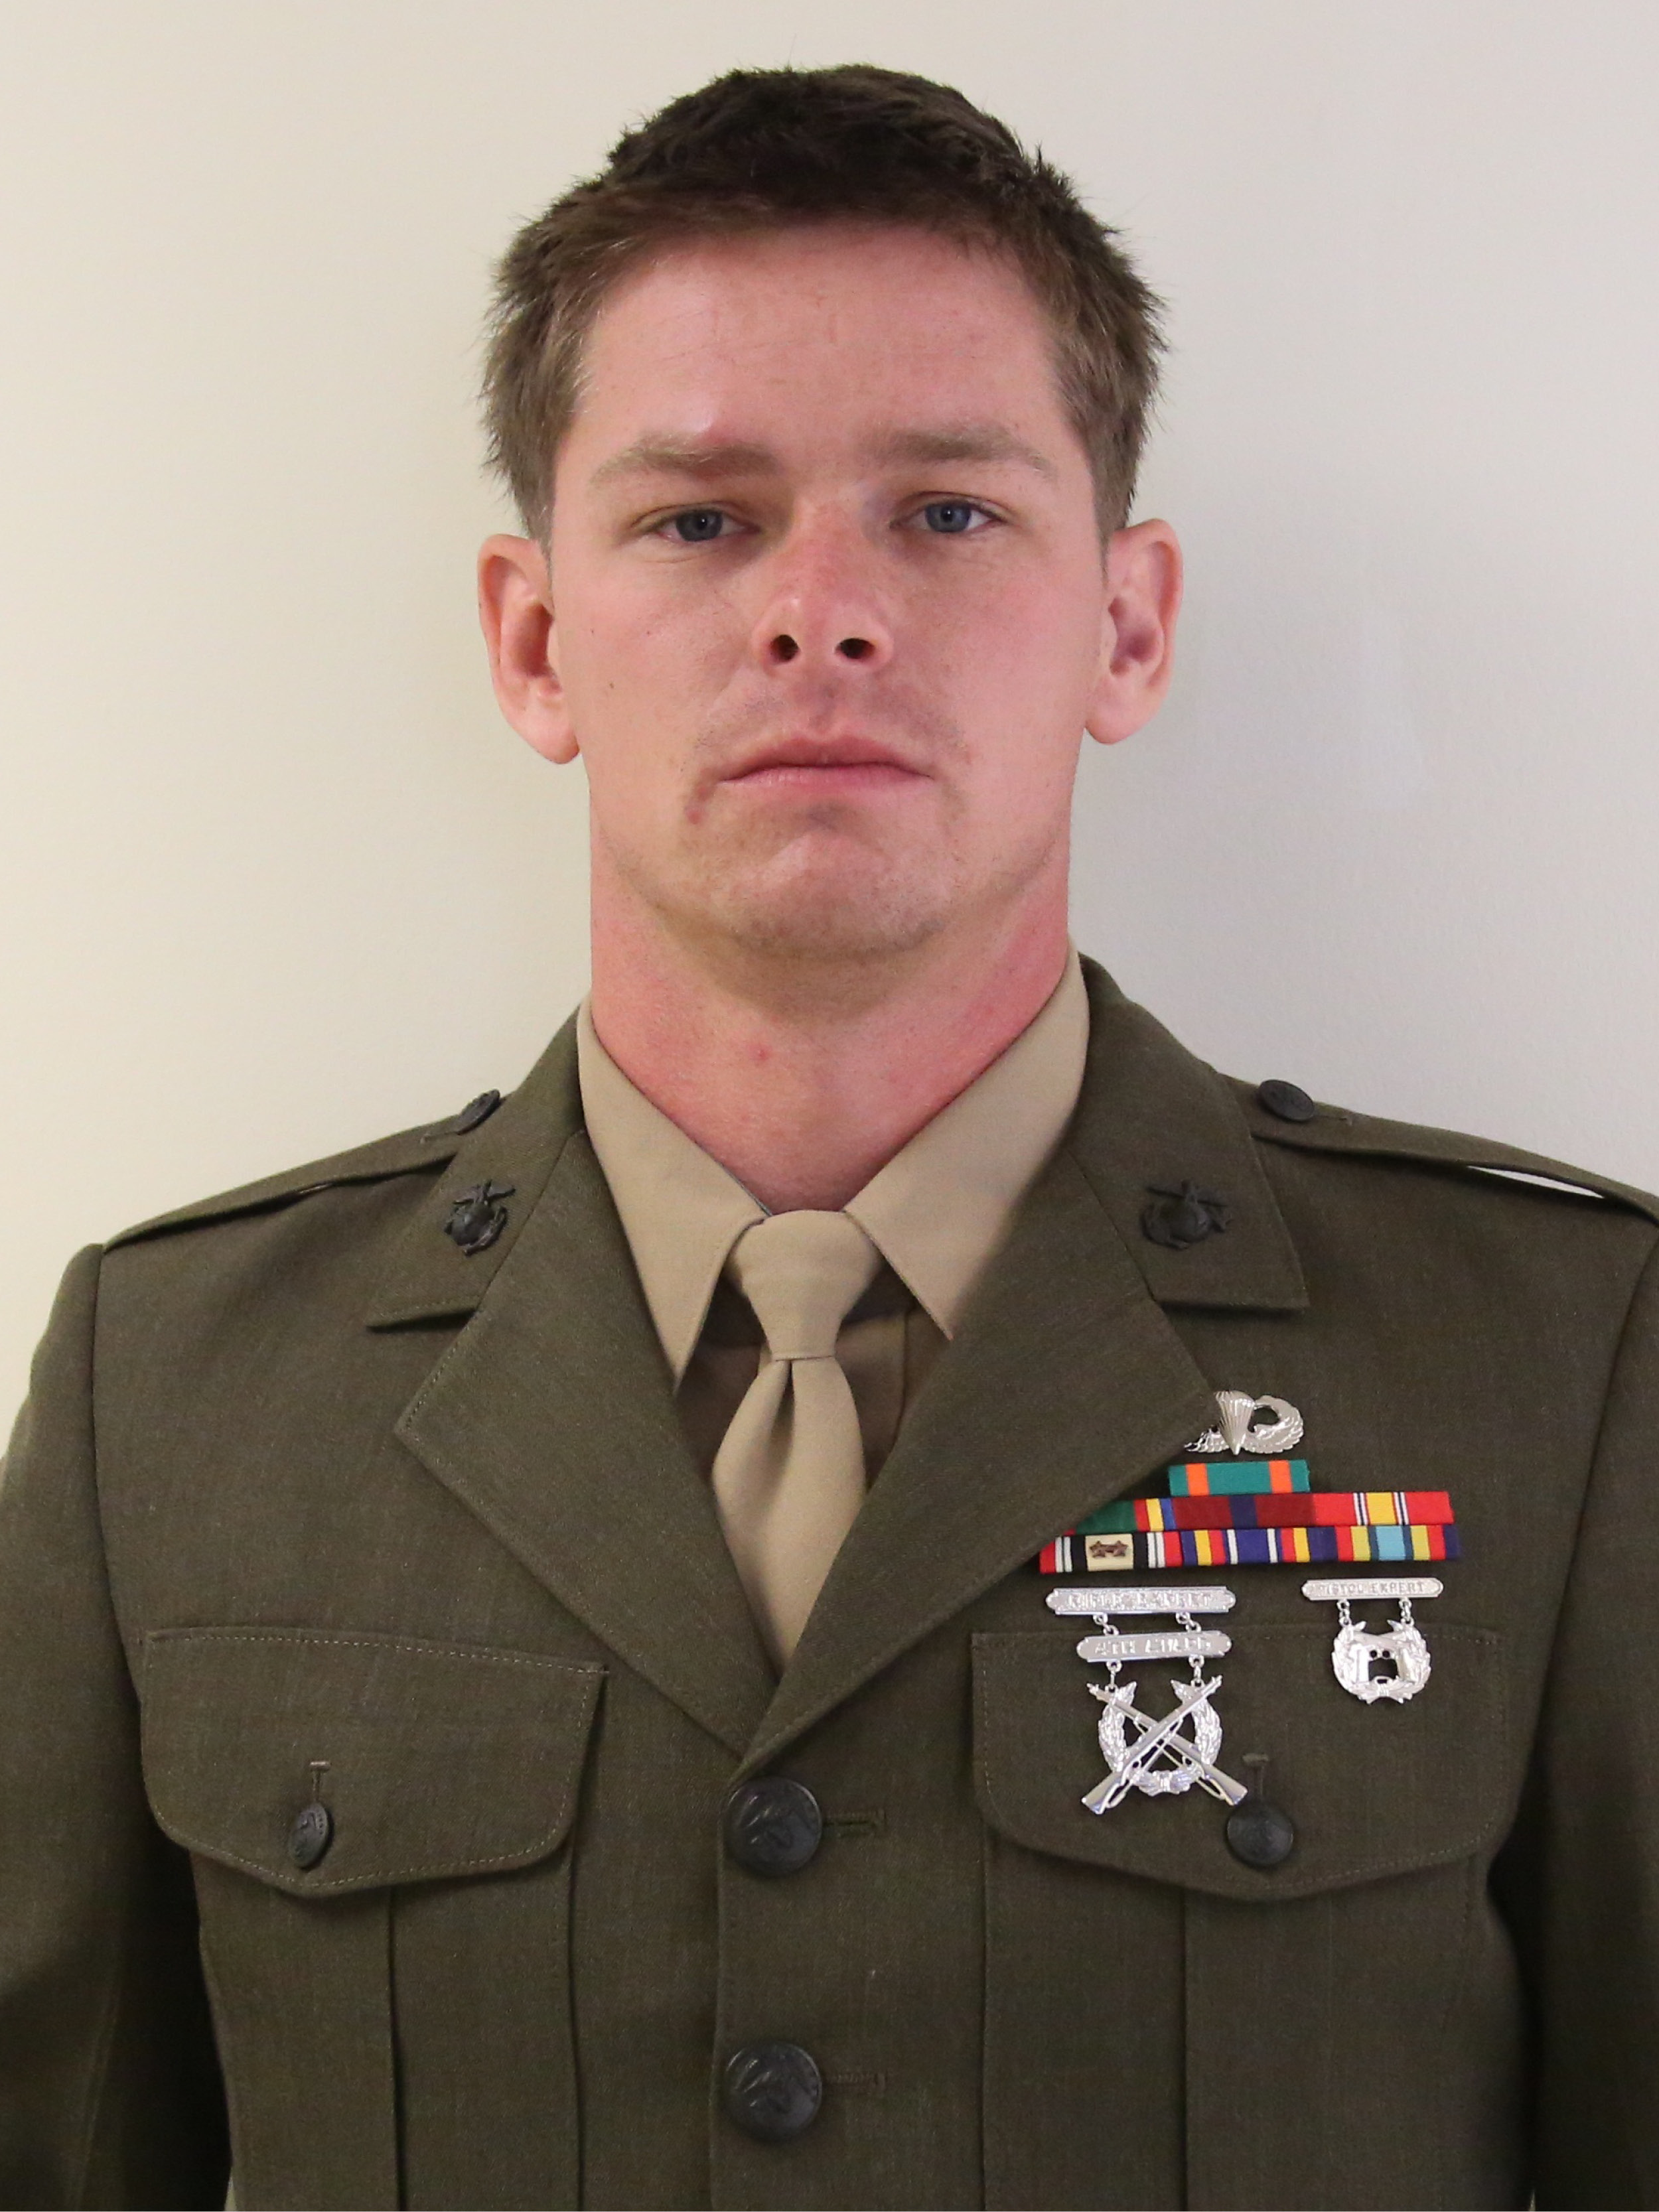 Staff Sgt. Marcus Bawol died when a U.S. Army UH-60 Blackhawk Helicopter crashed near Eglin, Florida, at approximately 8:30 p.m. March 10, 2015. Bawol, 26, a native of Warren, Michigan, served within U.S. Marine Corps Forces, Special Operational Command as a critical skills operator. His personal awards include the Navy and Marine Corps Commendation Medal, Navy and Marine Corps Achievement Medal, Combat Action and Good Conduct Medal.